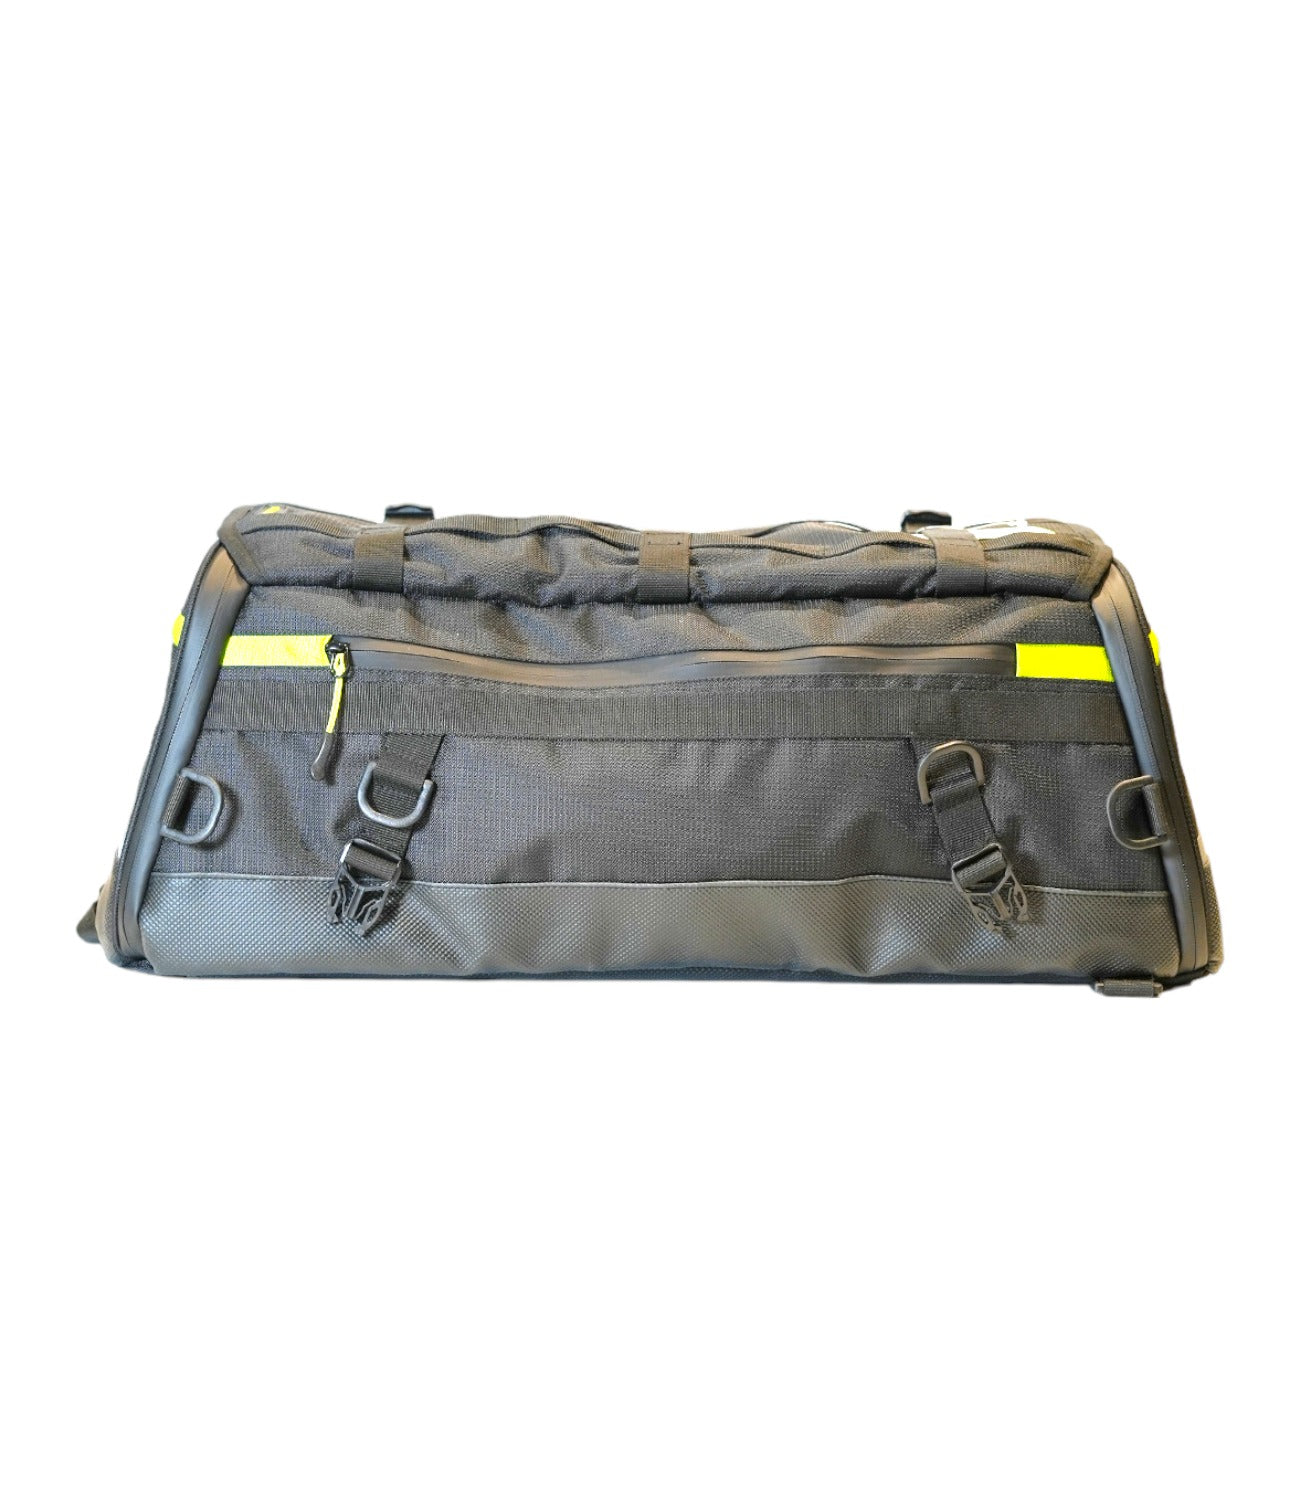 Nomad Gears Maximus Motorcycle Tail Bag